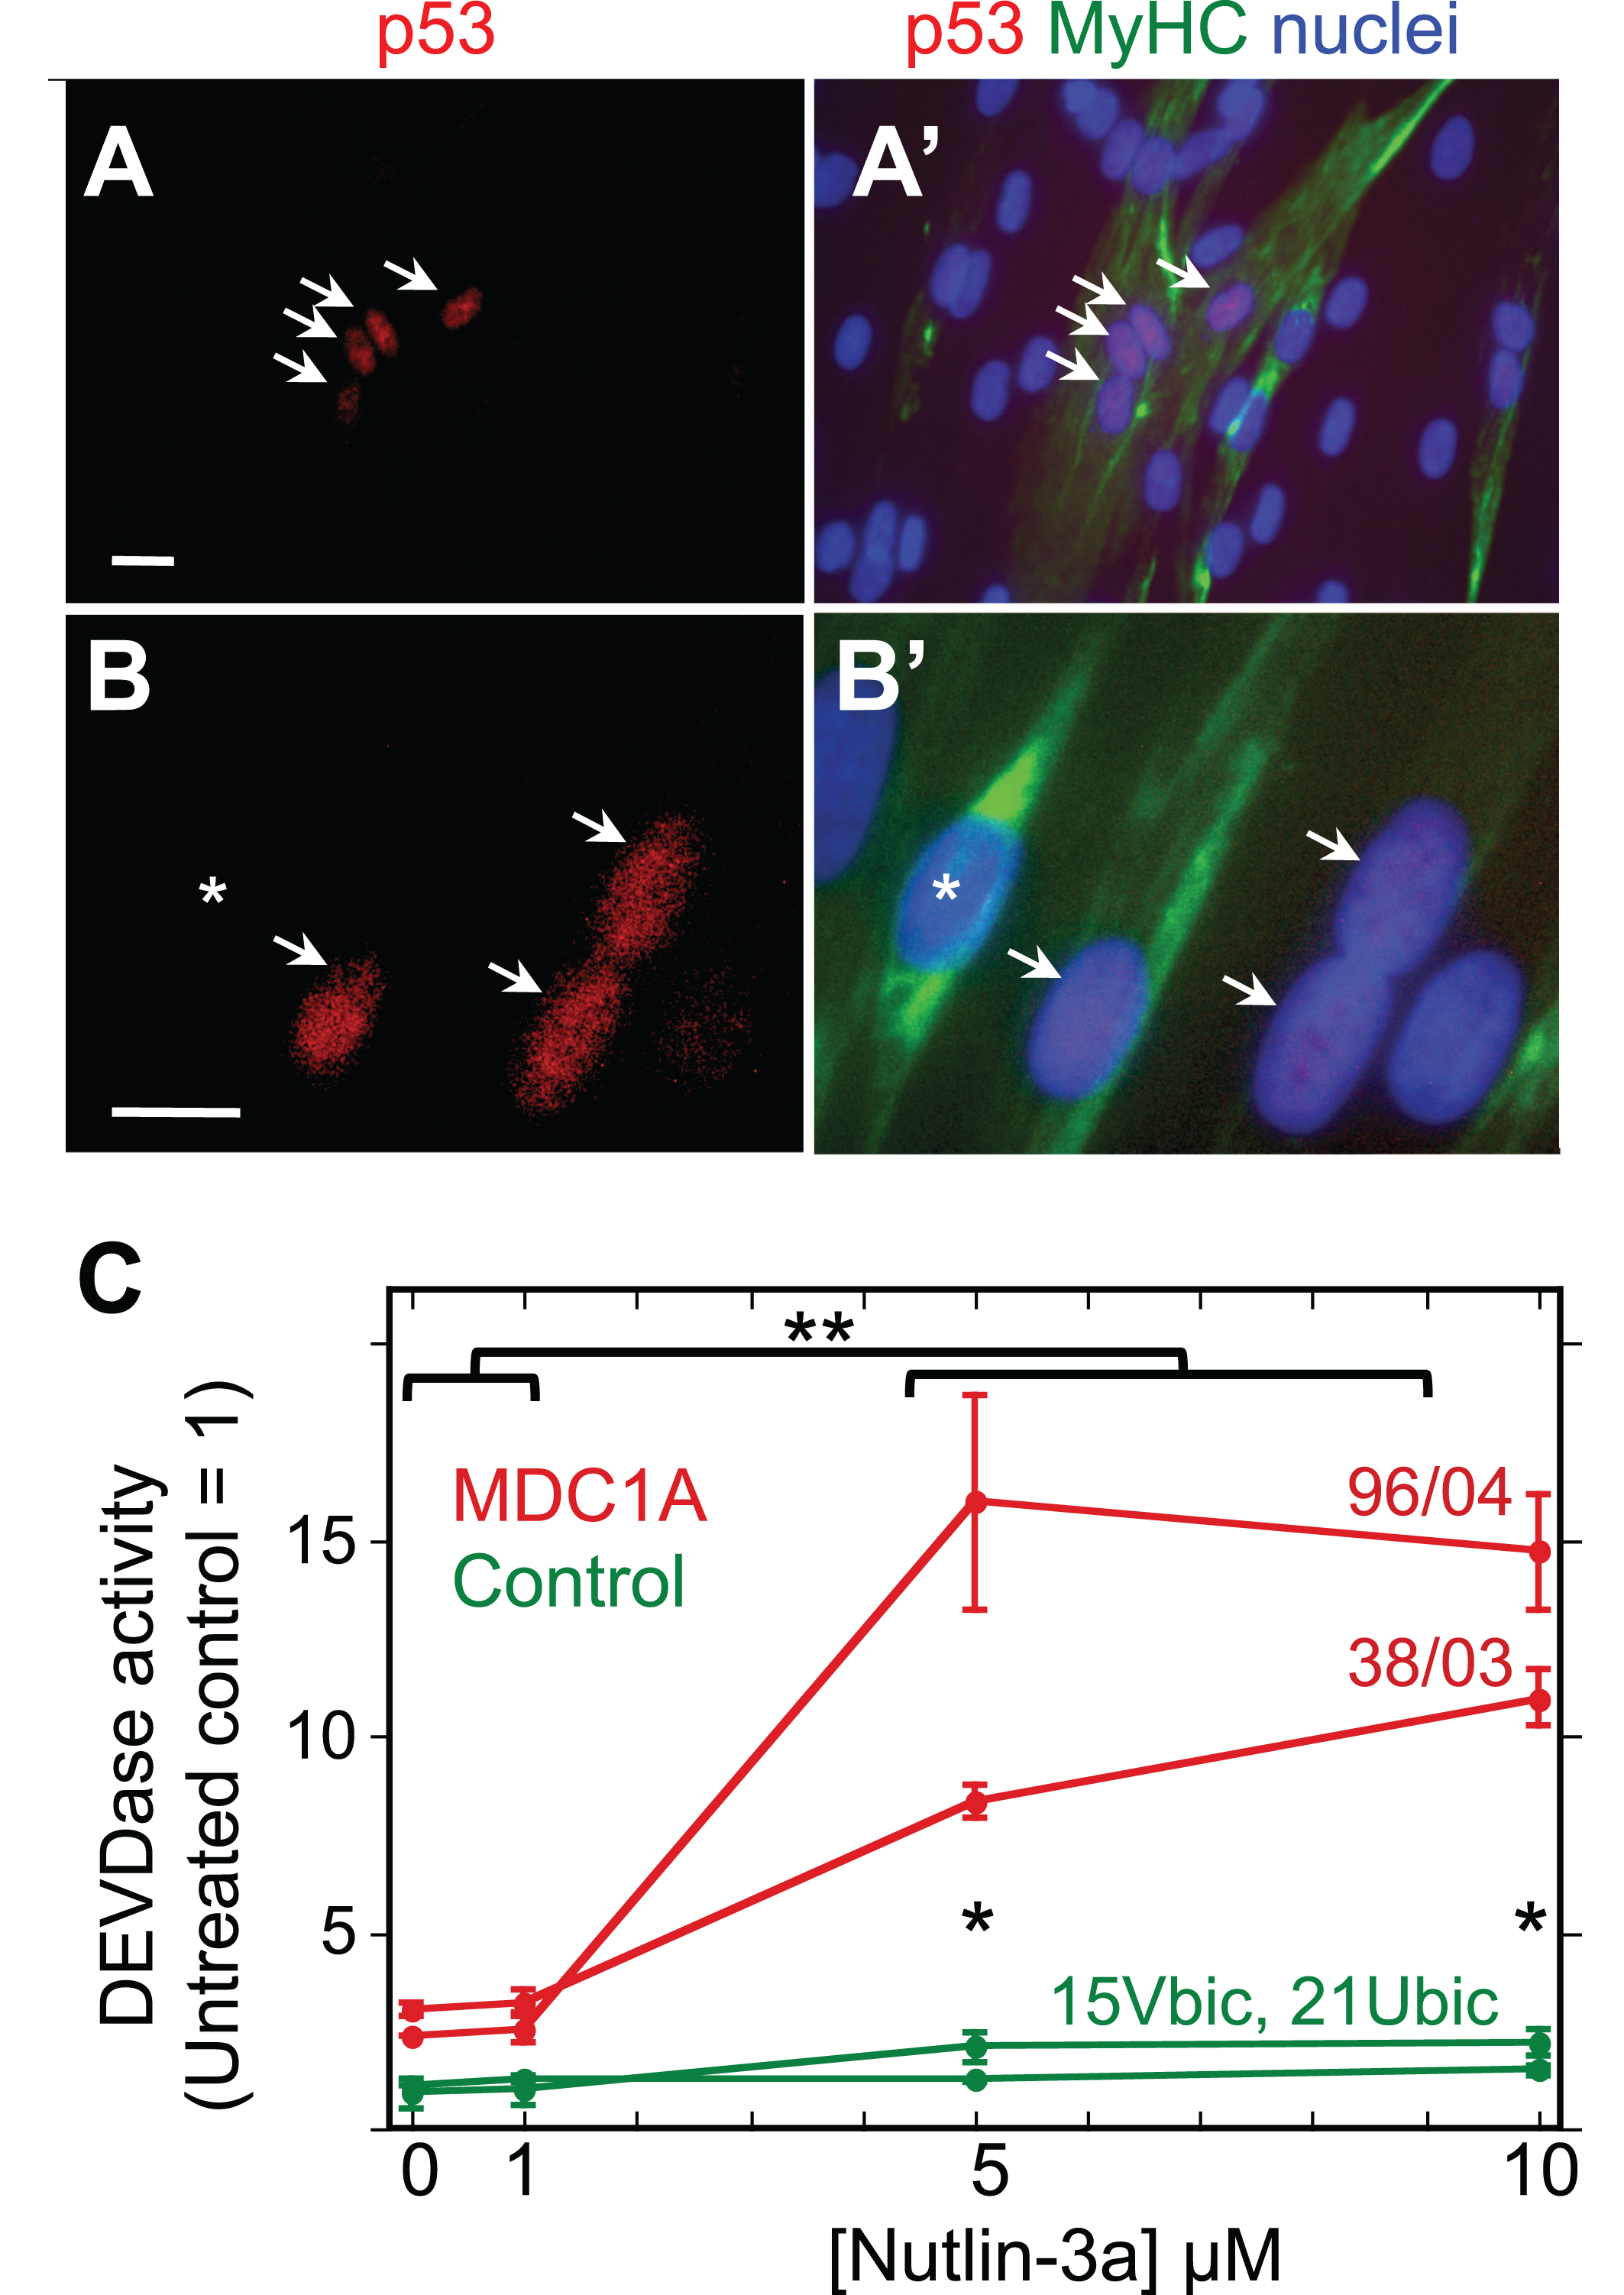 MDC1A myogenic cells show atypical accumulation of p53 and sensitivity to HDM2 inhibition. A, A’. Lower power view of a 4d differentiated culture of 50/04 human myogenic cells. Four nuclei, indicated by arrows, showed nuclear accumulation of p53 (red), whereas many surrounding nuclei (blue) did not show such immunostaining for p53. Immunostaining for myosin heavy chain (MyHC, green) identified differentiated myotubes and showed that the four p53-positive nuclei in this image were within a myotube. Typically, p53 was found in about 10% of MDC1A nuclei, but in <0.5% of healthy control nuclei; see text for quantitation. Bar in panel A = 20μM. B, B’. A higher power view of a 4d differentiated culture of 38/03 cells. Arrows indicate p53-positive nuclei; asterisk indicates a p53-negative nucleus. Bar in panel B = 20μM. C. Treatment with nutlin-3a, which prevents HDM2 from inhibiting p53, generated a larger increase in DEVDase activity in differentiated cultures of MDC1A myogenic cells (red lines, donors 96/04 and 38/03 as indicated) than in healthy control cultures (green lines, donors 15Vbic and 21Ubic). Single asterisks indicate that the control and MDC1A average values differed with P < 0.01 at 5μM and 10μM nutlin-3a. **P < 0.01 to indicate that DEVDase activity was higher in MDC1A cultures at nutlin-3a concentrations of 5μM and 10μM vs. MDC1A cultures that were untreated or treated with 1μM nutlin-3a. Statistical test by ANOVA. Error bars = SE; n = 3 for each individual donor.